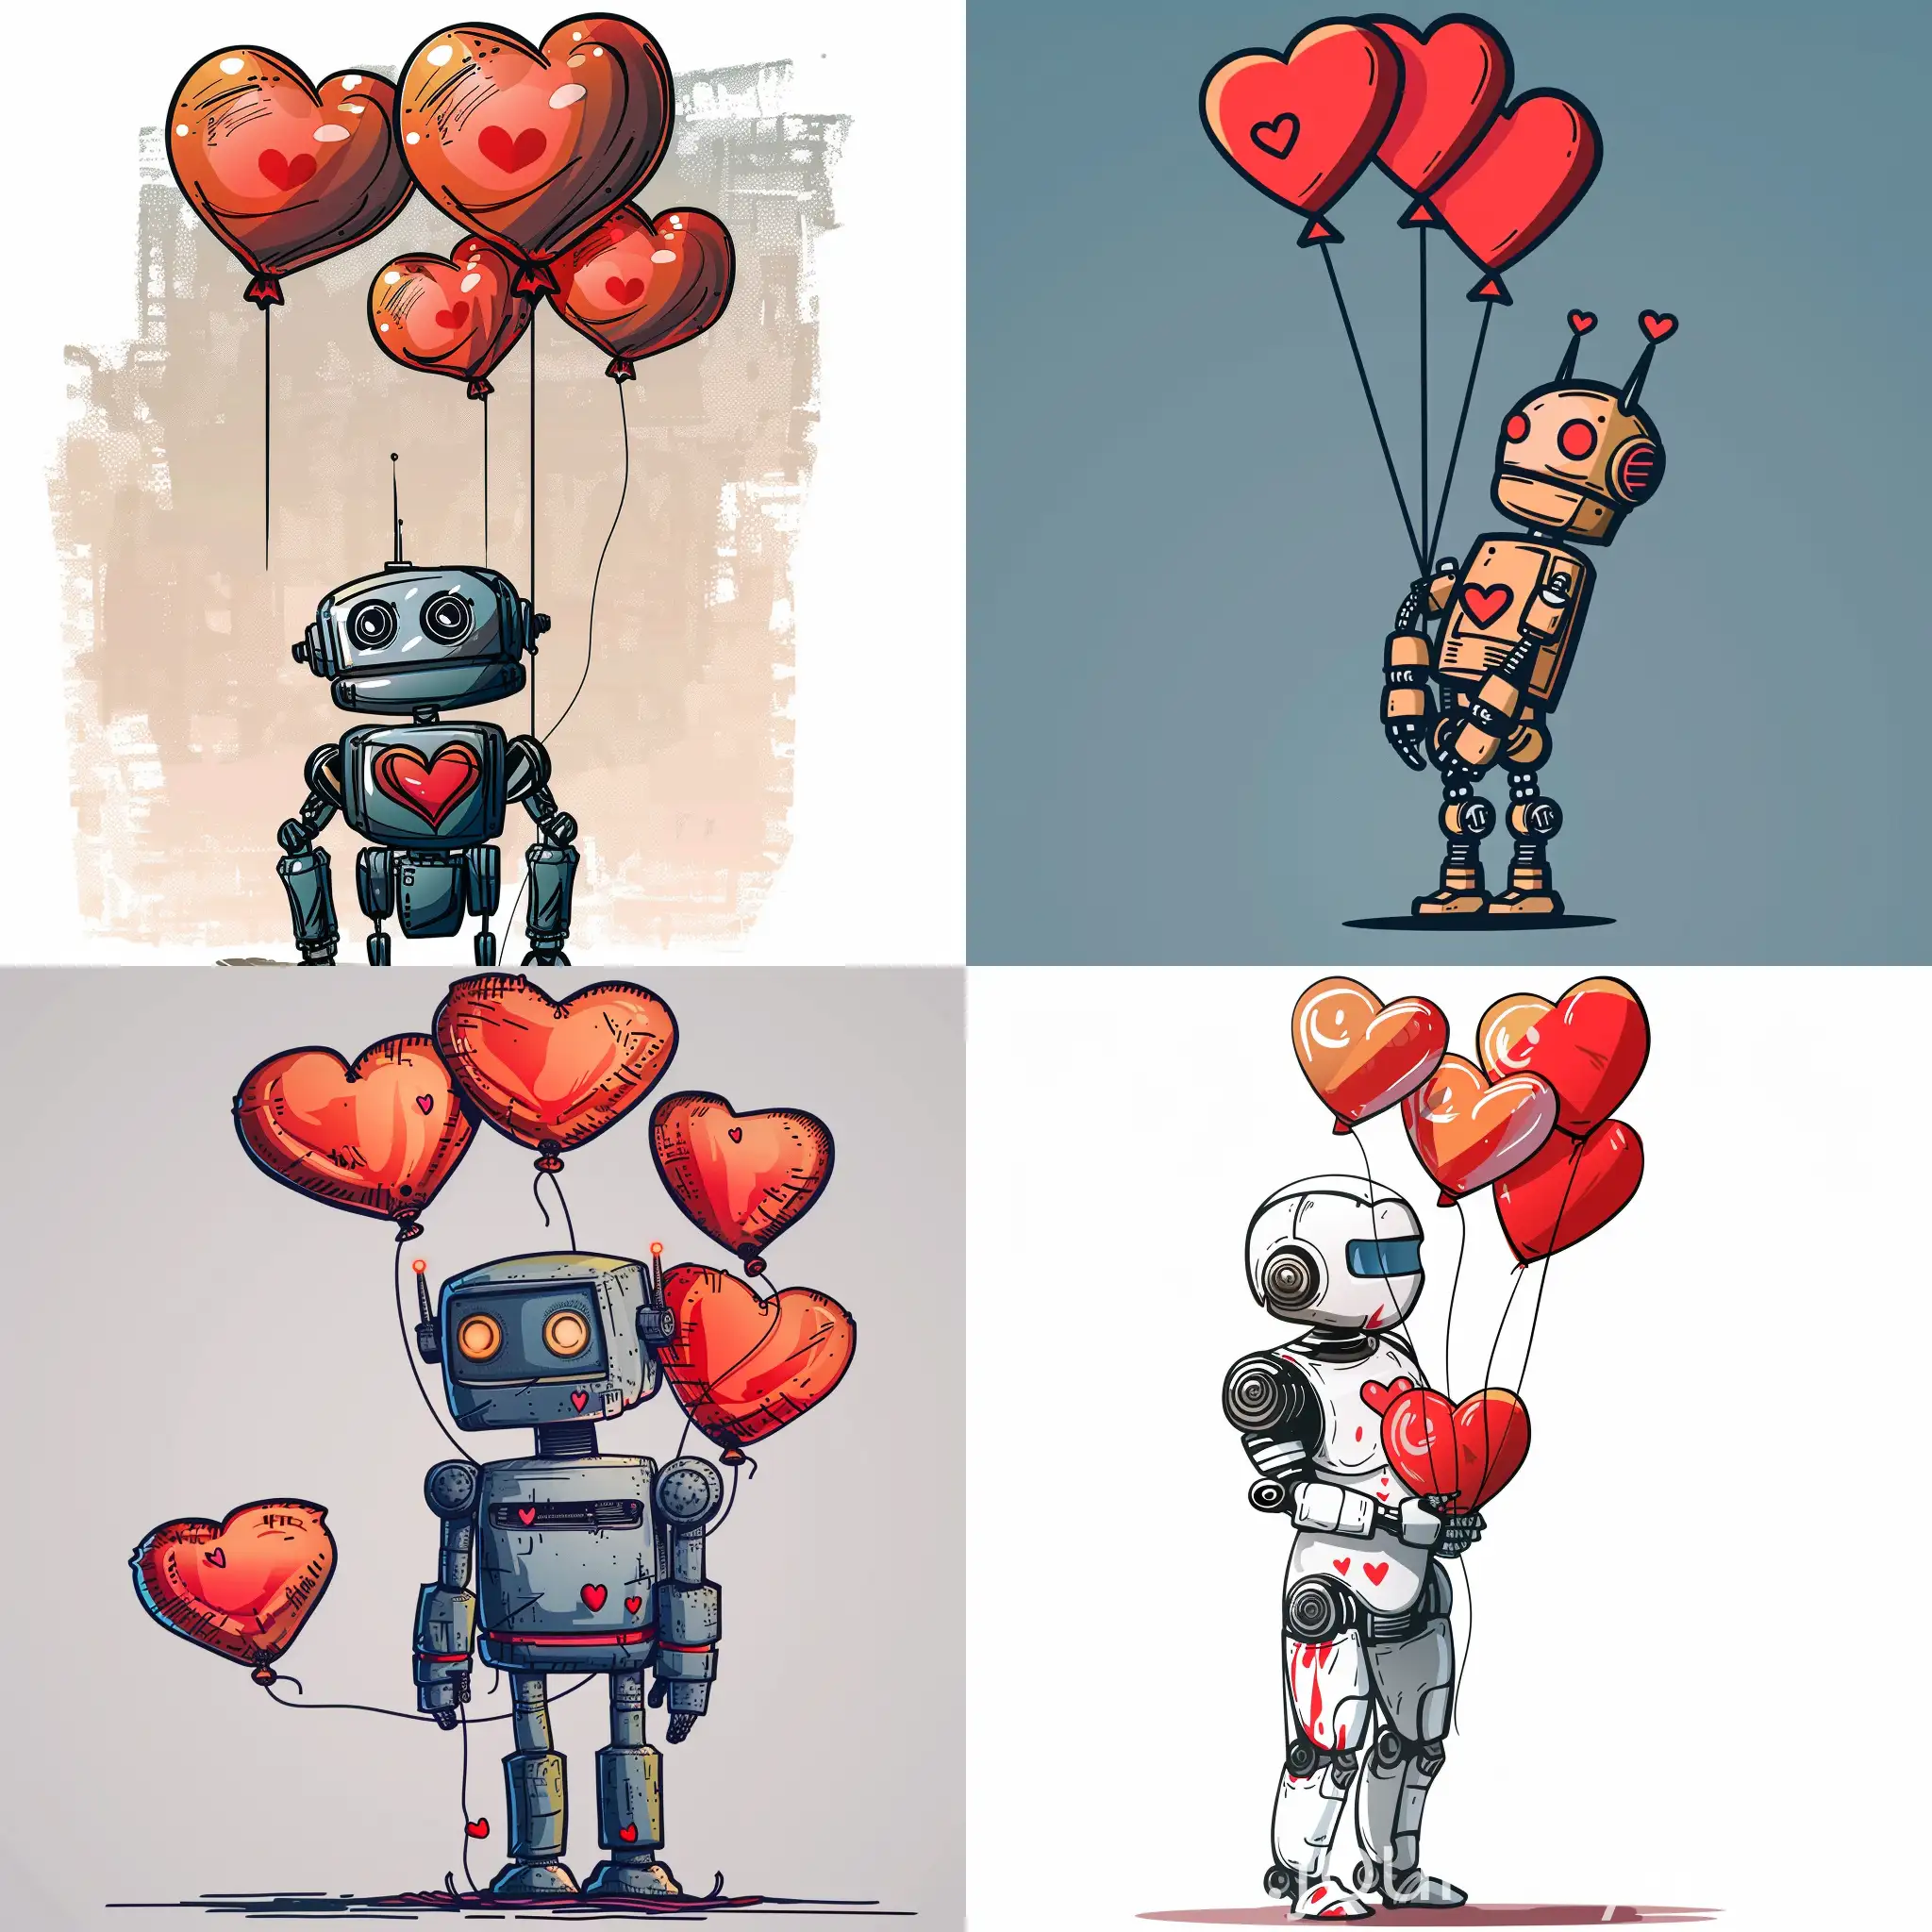 Cheerful-Robot-Holding-Red-Heart-Balloons